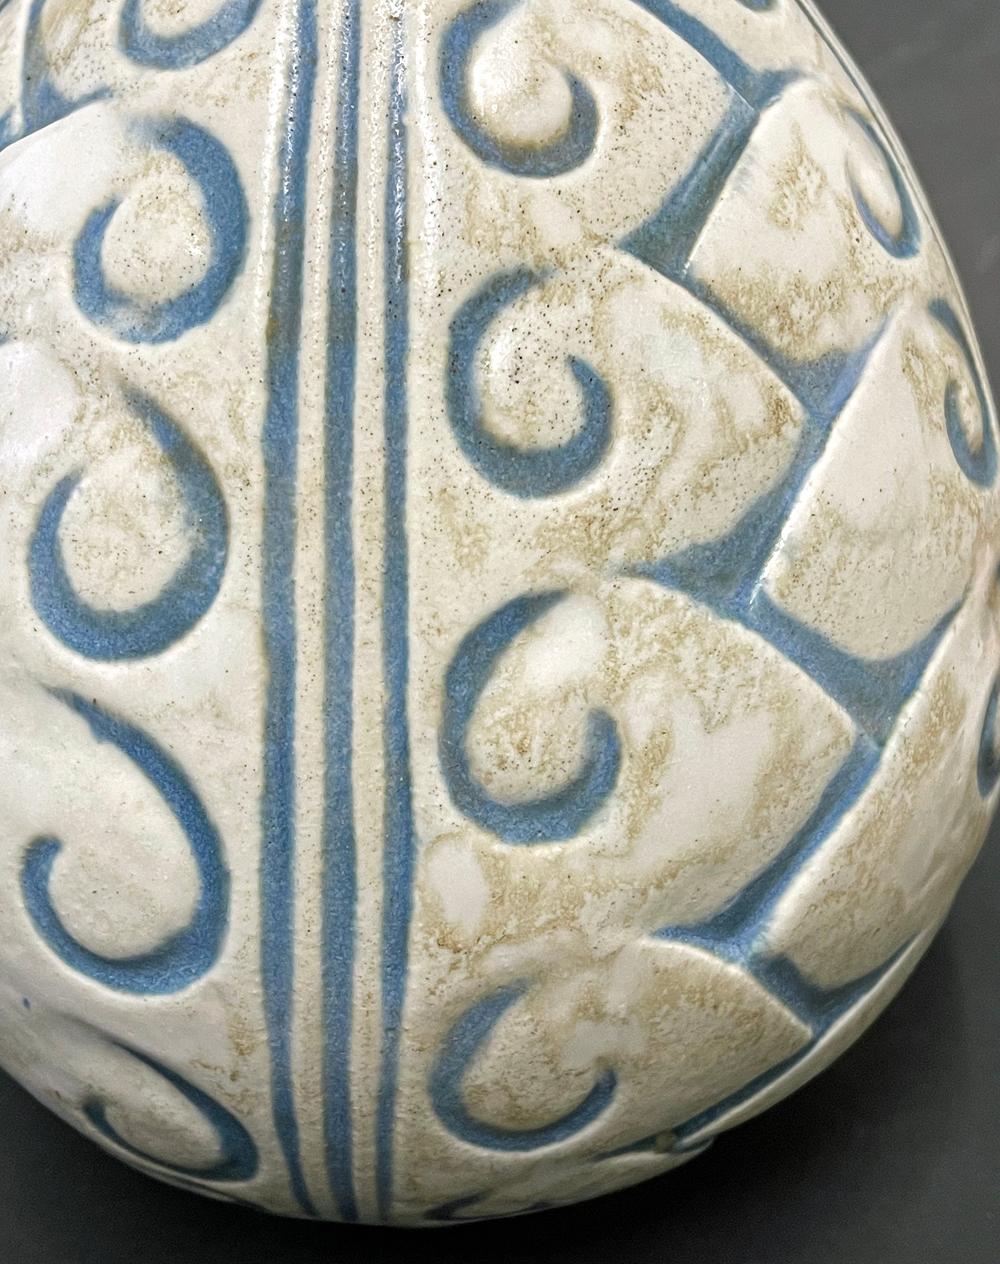 Glazed Art Deco Vase with Stylized Foliate Forms, Blue and Gray, by Mougin